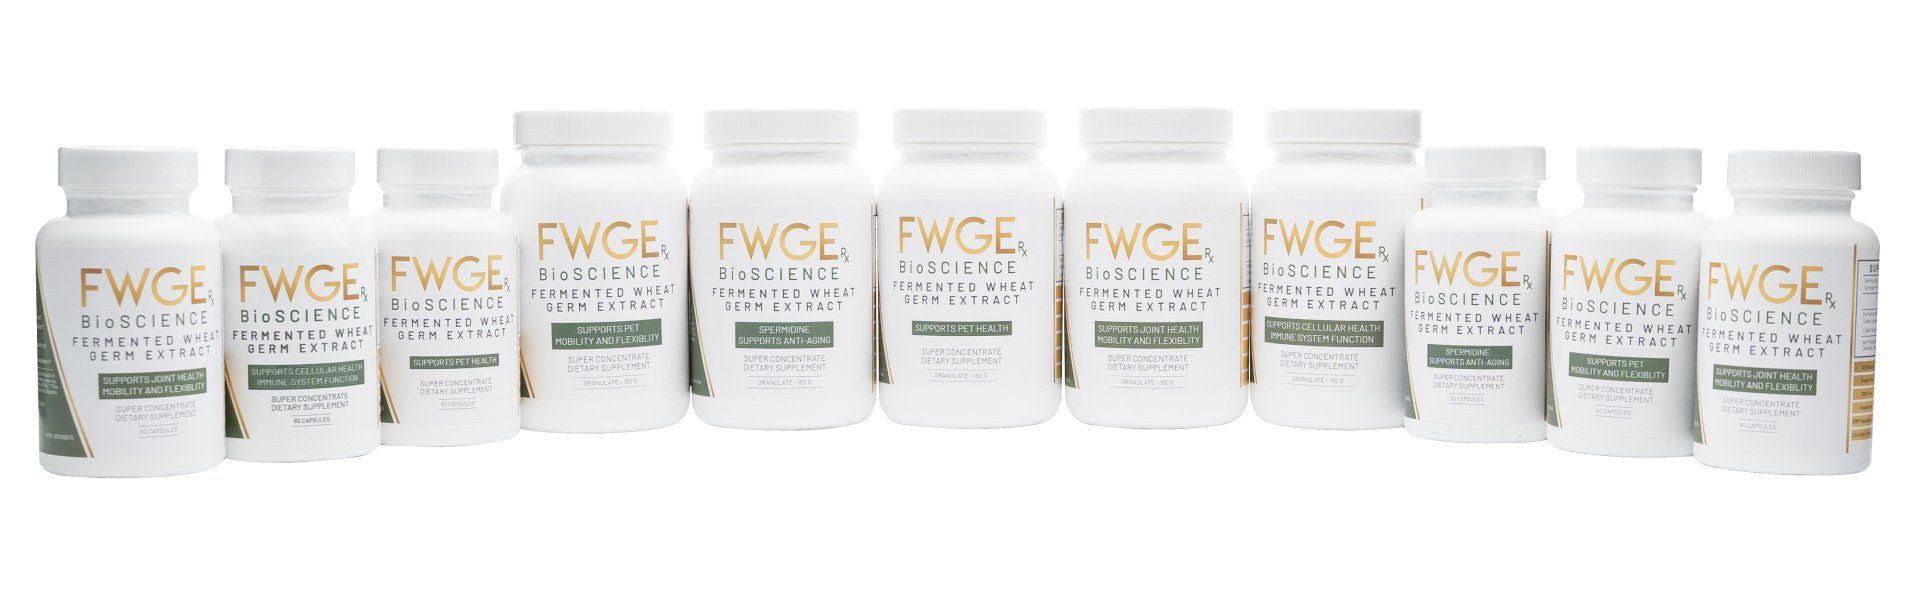 Adjuvant Fermented Wheat Germ Extract (FWGE™) Nutraceutical Improves Survival of High-Risk Skin Melanoma Patients: A Randomized, Pilot, Phase II Clinical Study with a 7-Year Follow-Up